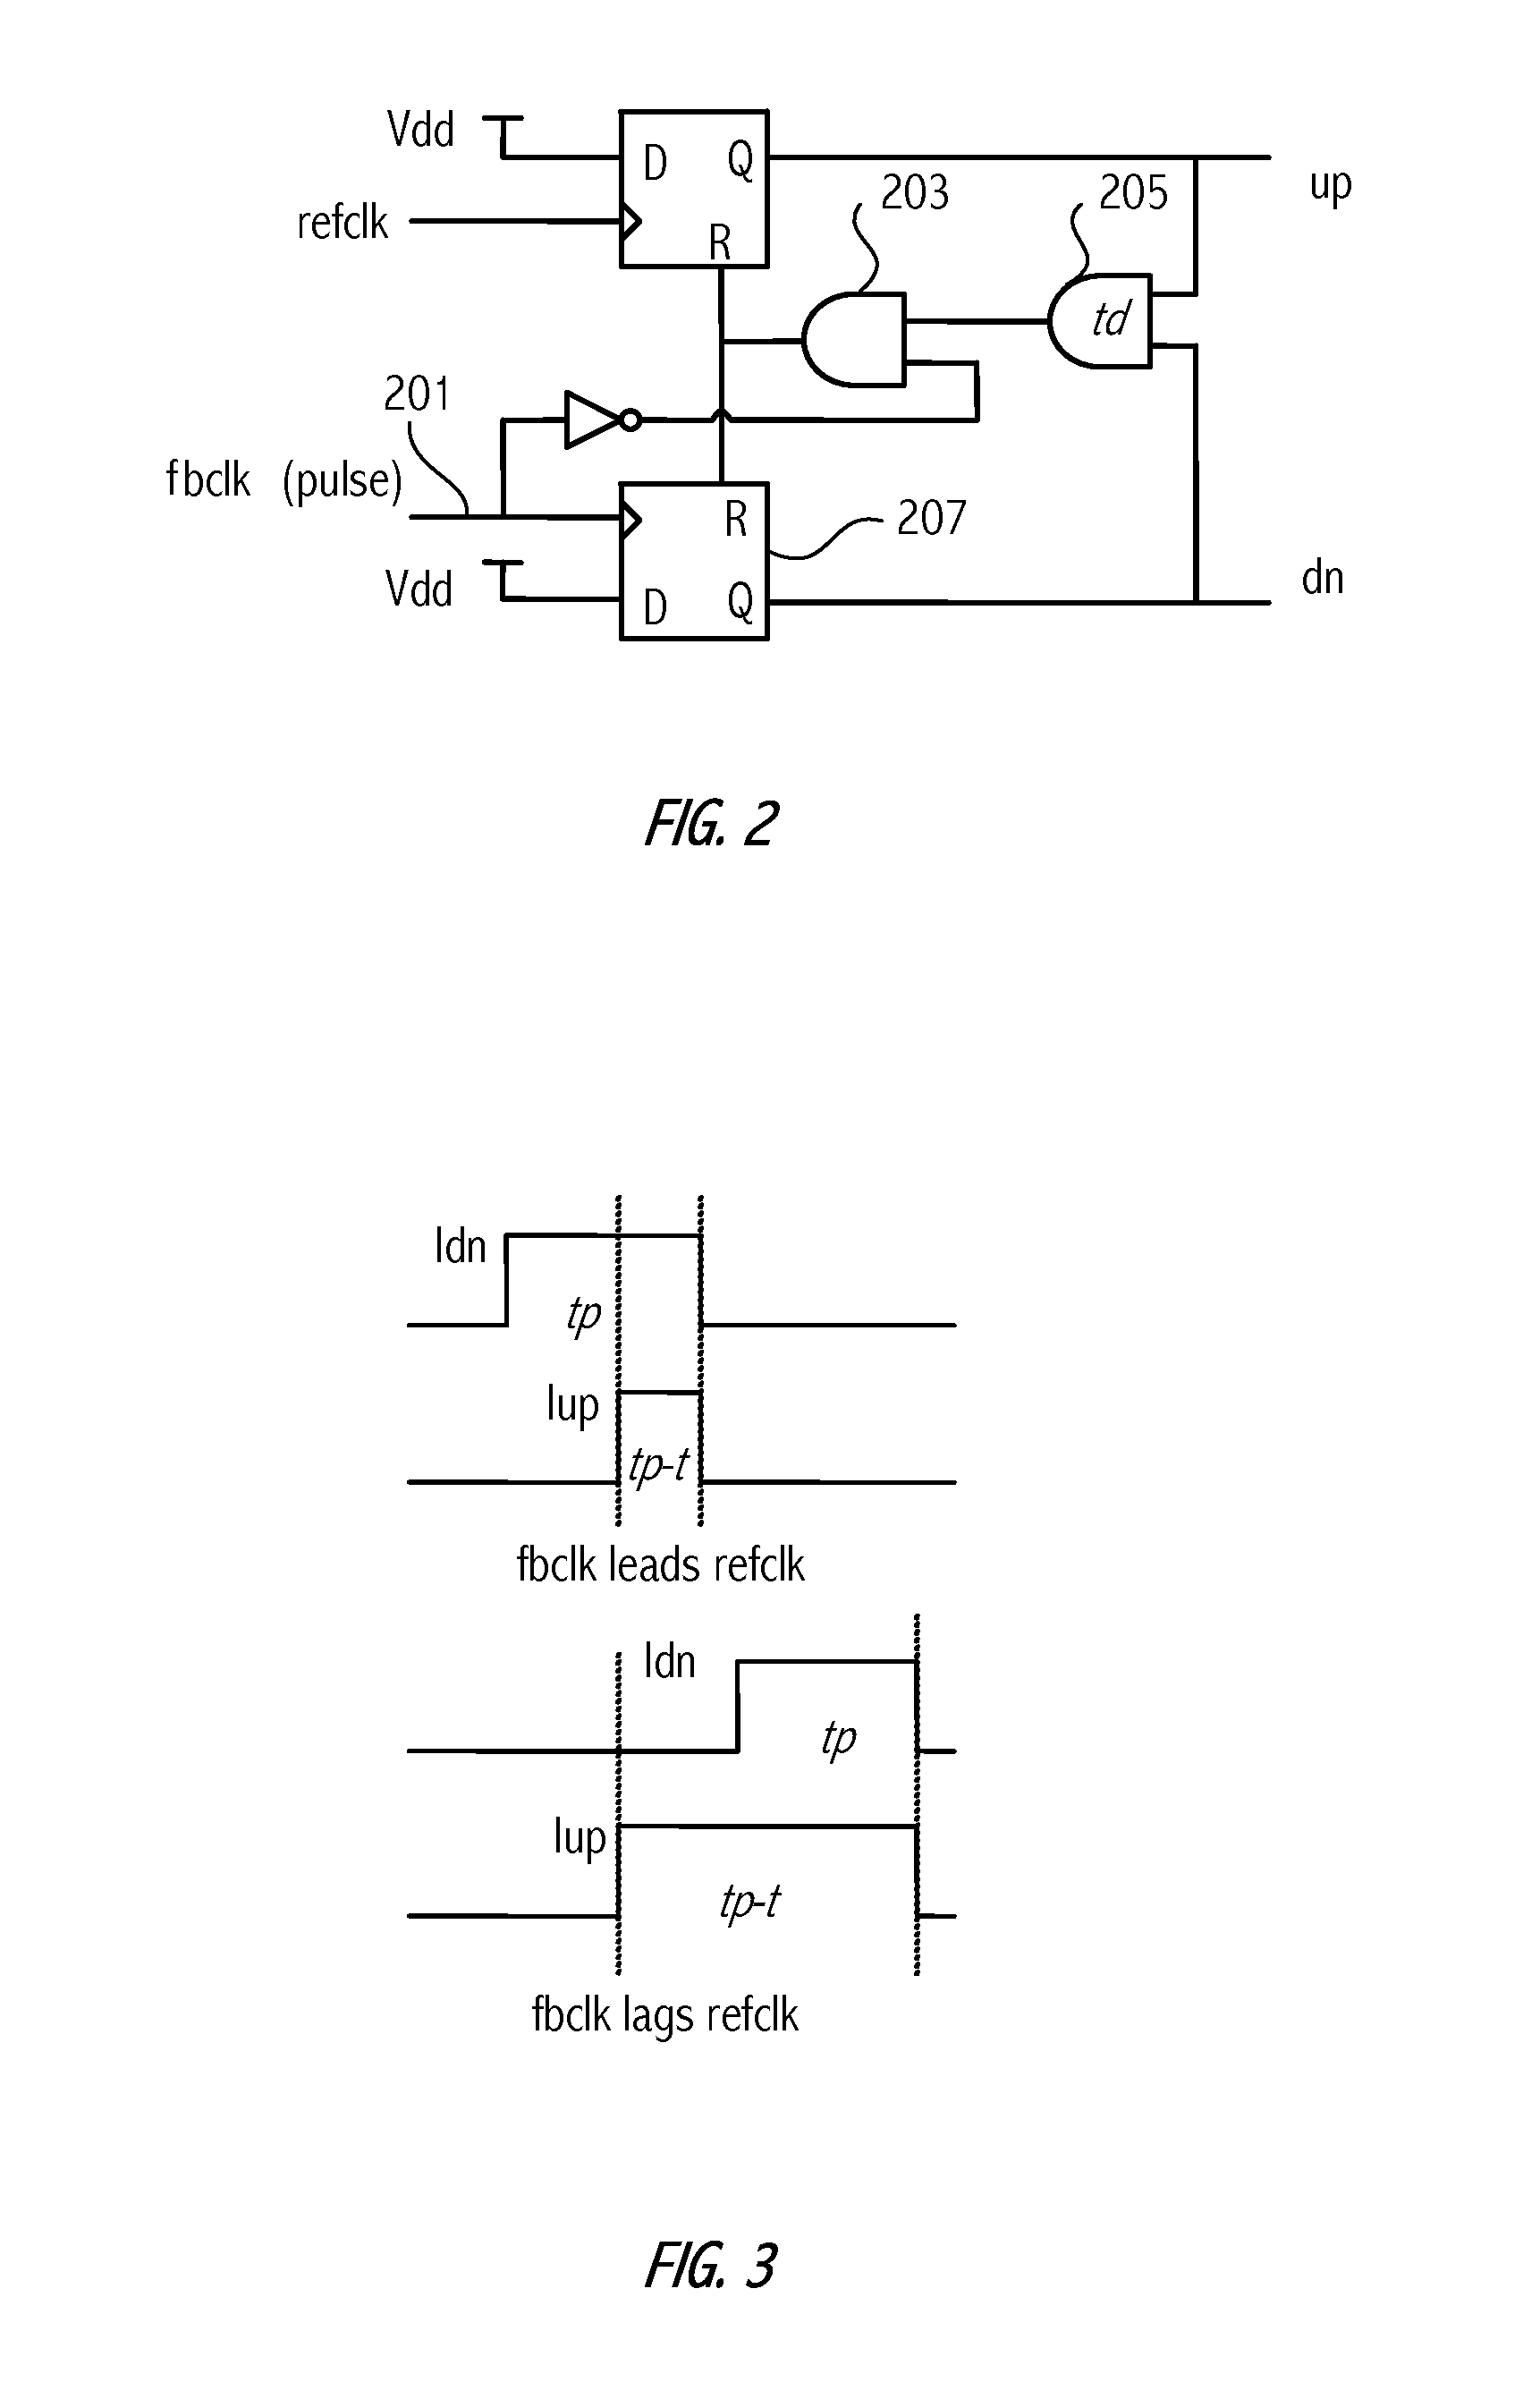 Method and apparatus for charge pump linearization in fractional-n plls